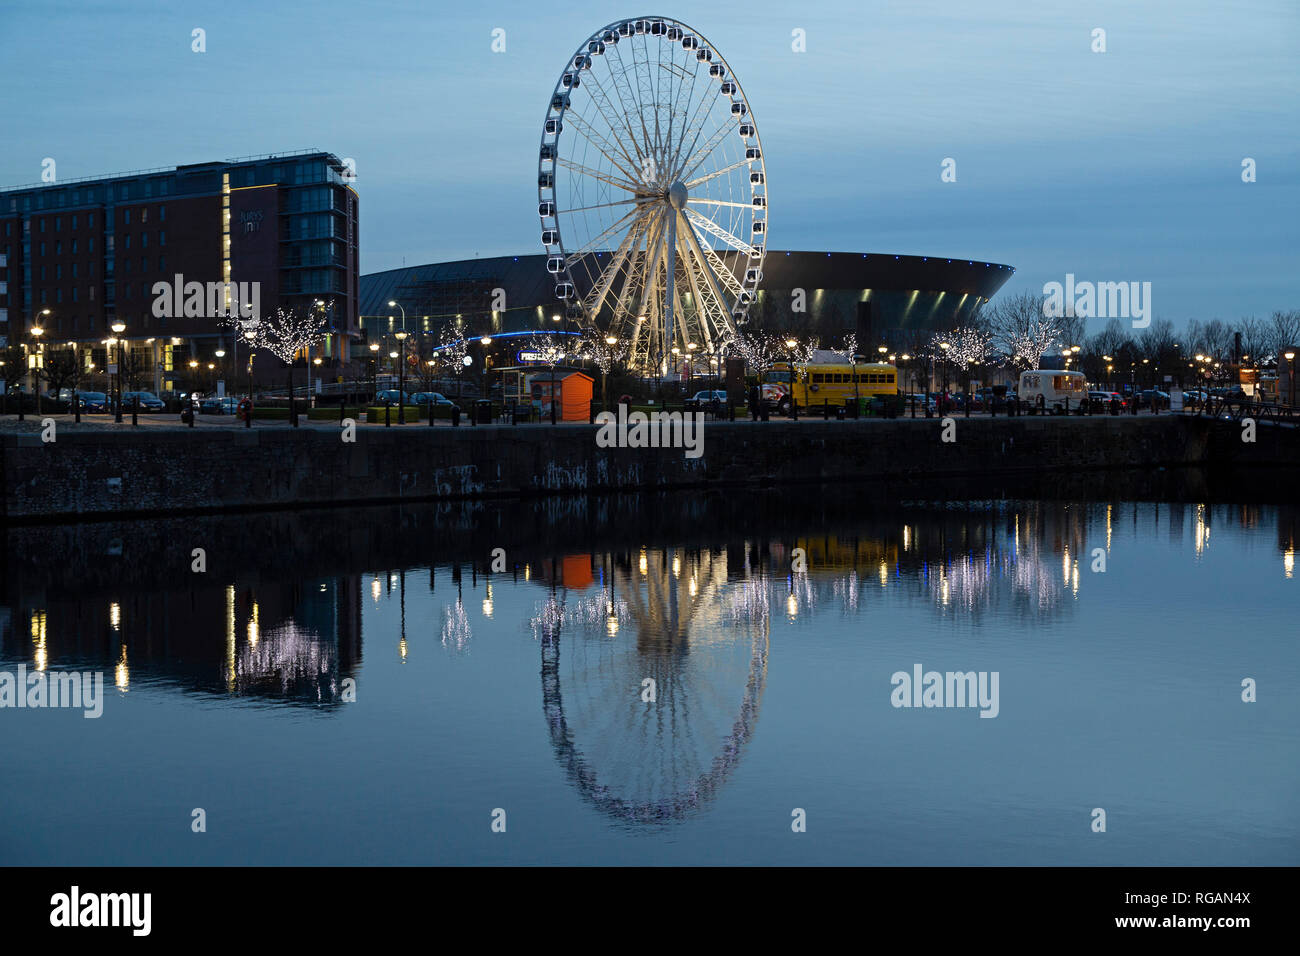 The Wheel of Liverpool at Keel Wharf in Liverpool, England. The Ferris wheel stands next to the M&S Bank Arena (formerly the Echo Arena Liverpool). Stock Photo